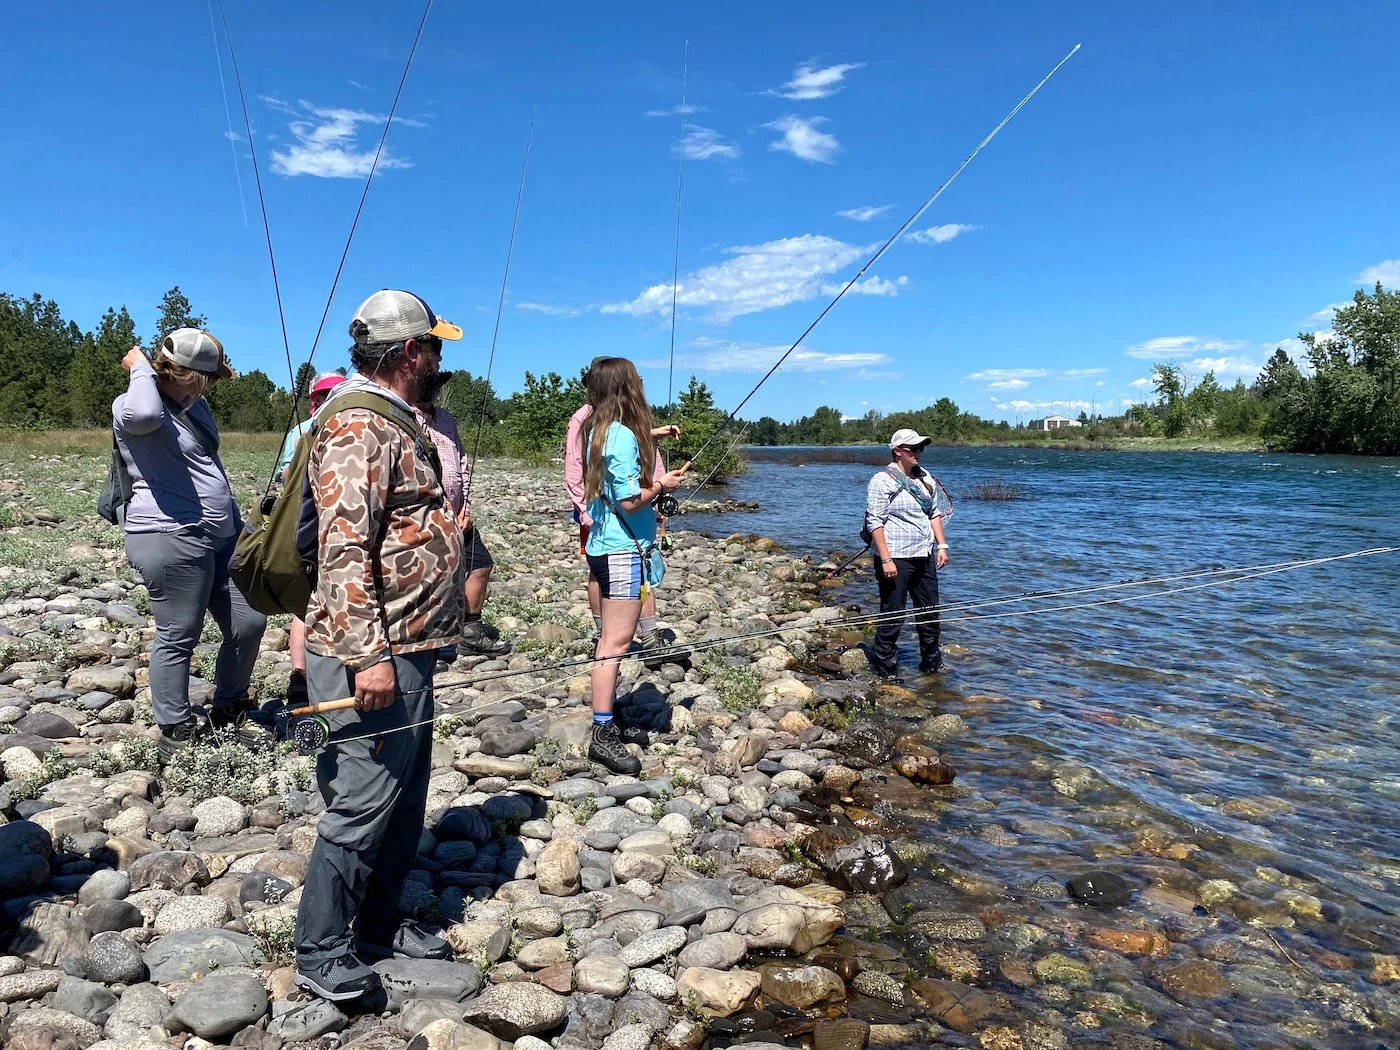 Orvis Fly Fishing School: My Experience - Rod and Reel Fly Fishing